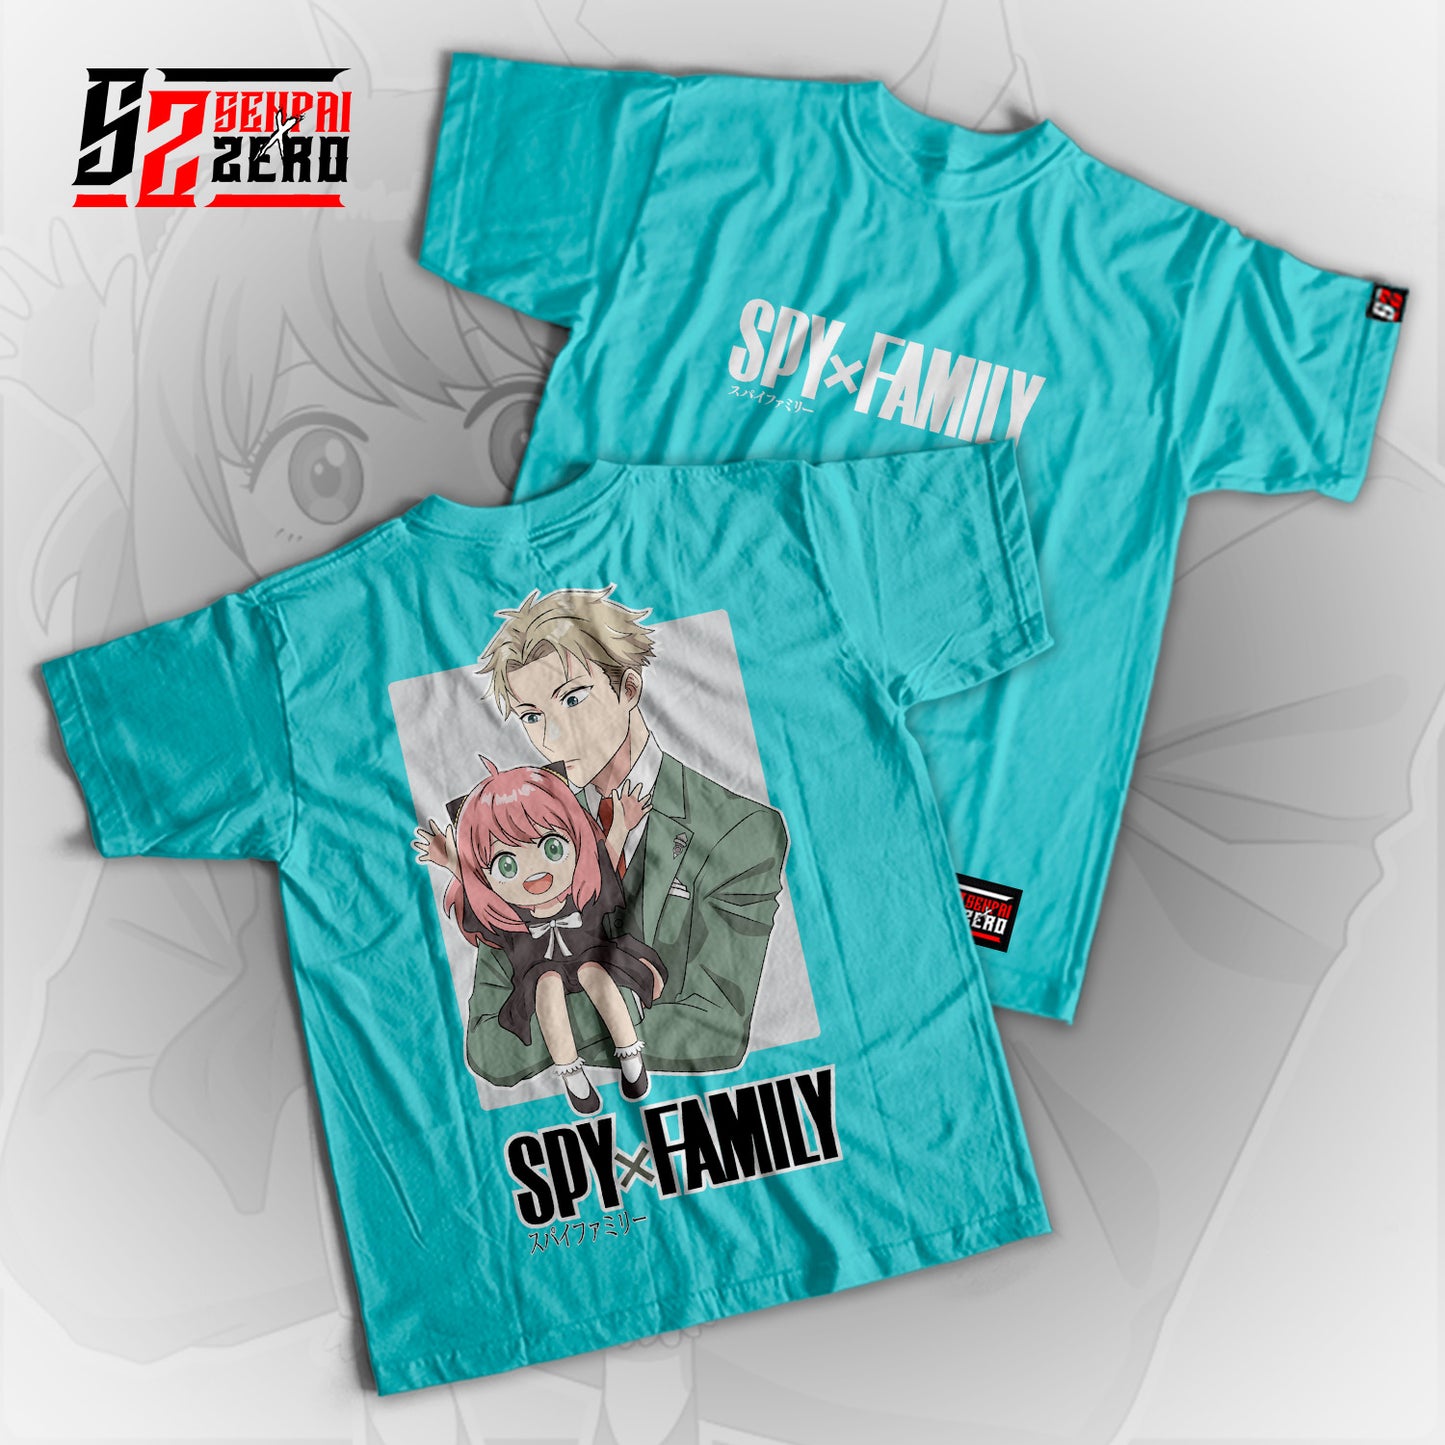 Anya and Loid Forger Spy x Family